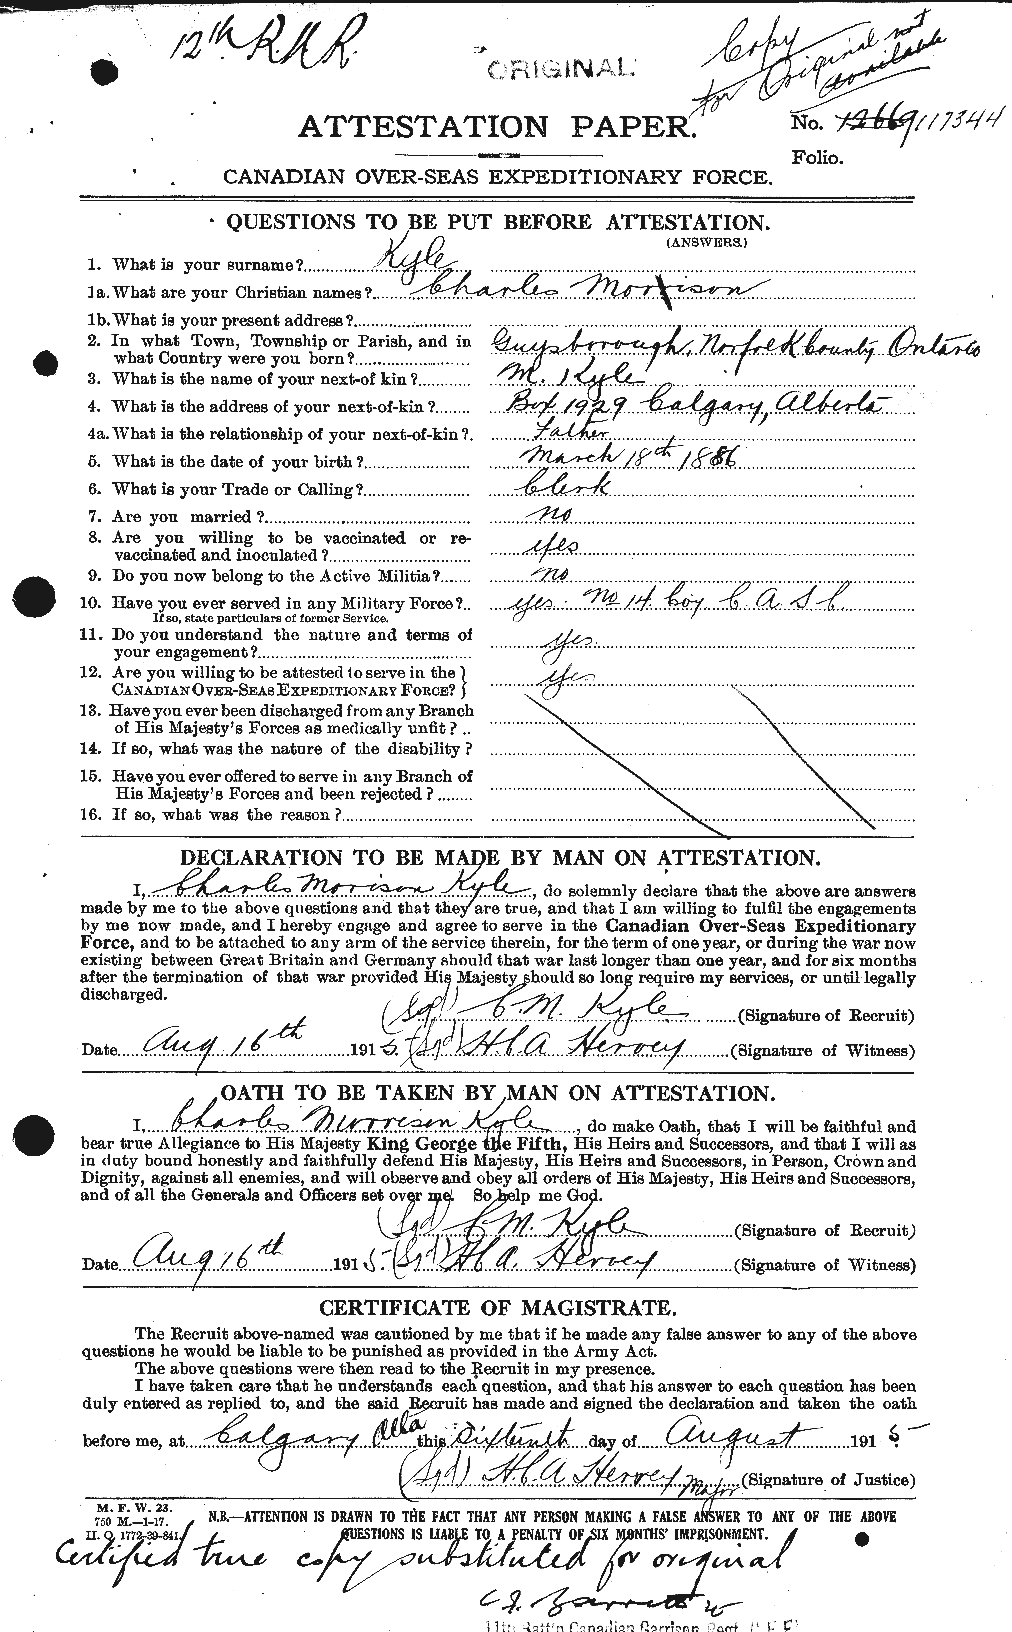 Personnel Records of the First World War - CEF 443686a